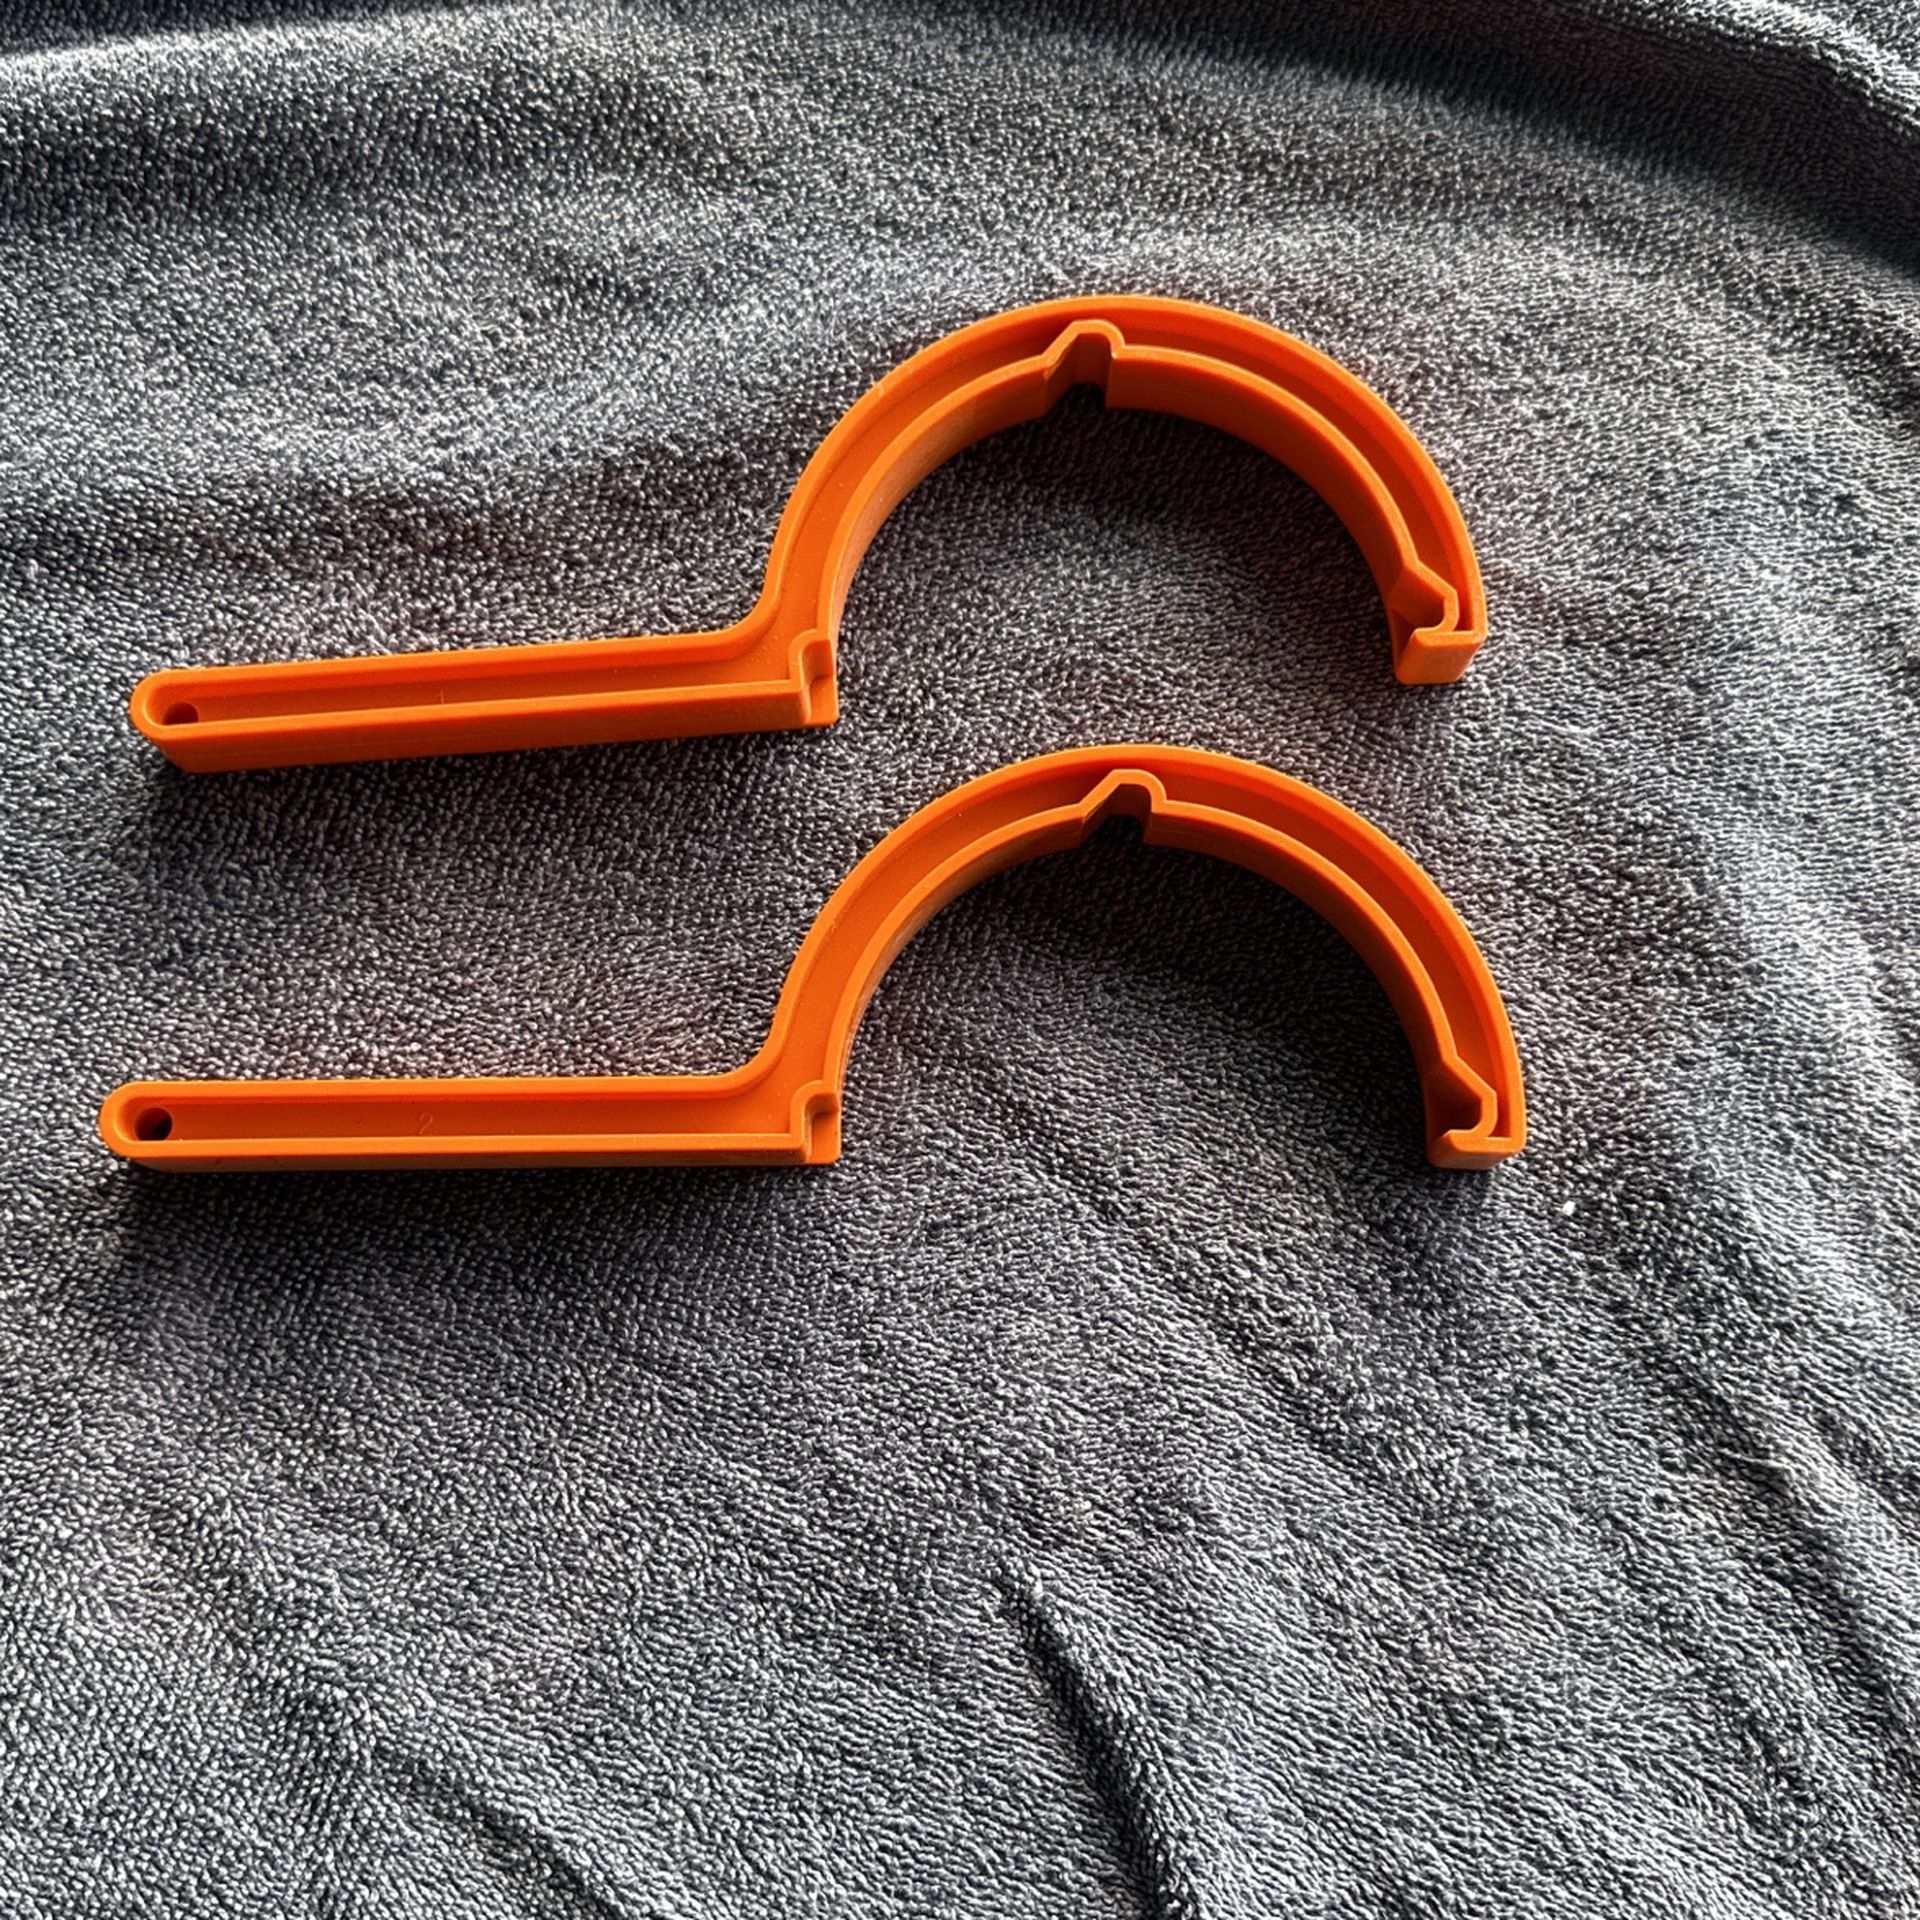 RV Sewer Hose Wrenches,